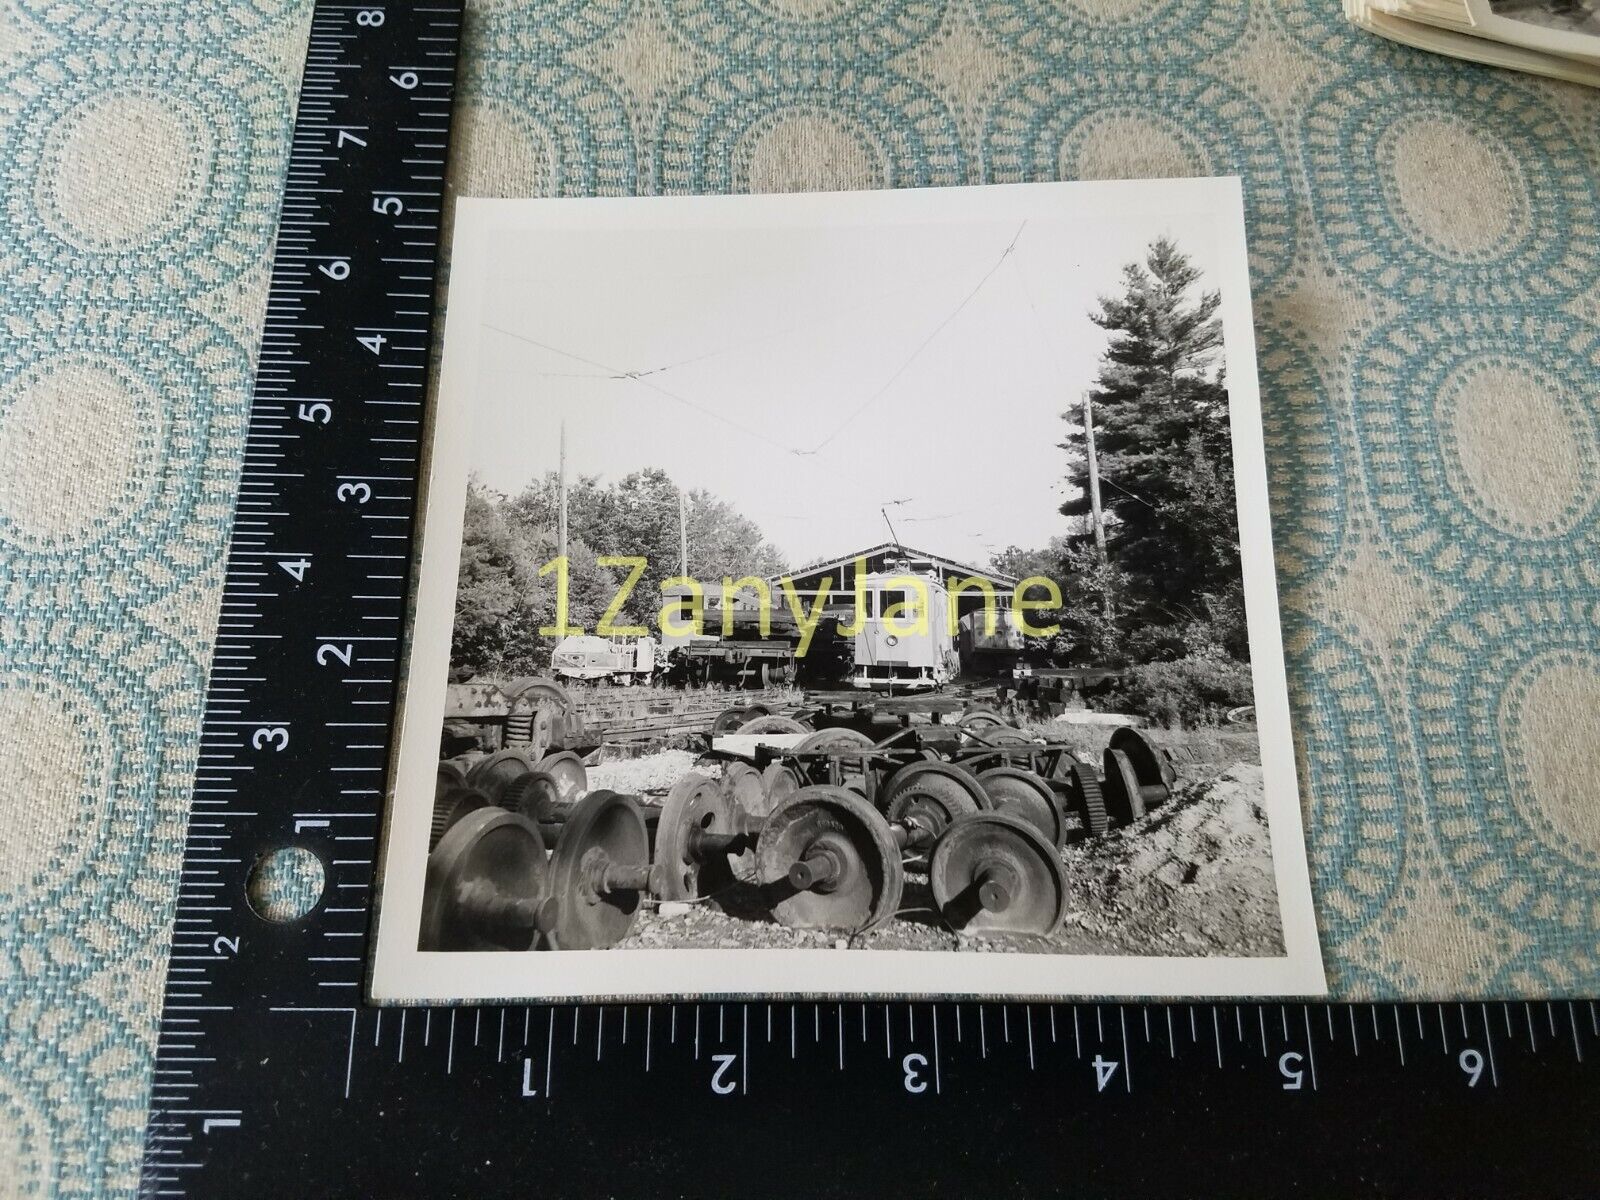 A004 VINTAGE TRAIN ENGINE PHOTO Railroad EASTERN MASS #S-71 IN CENTRAL YARD '72